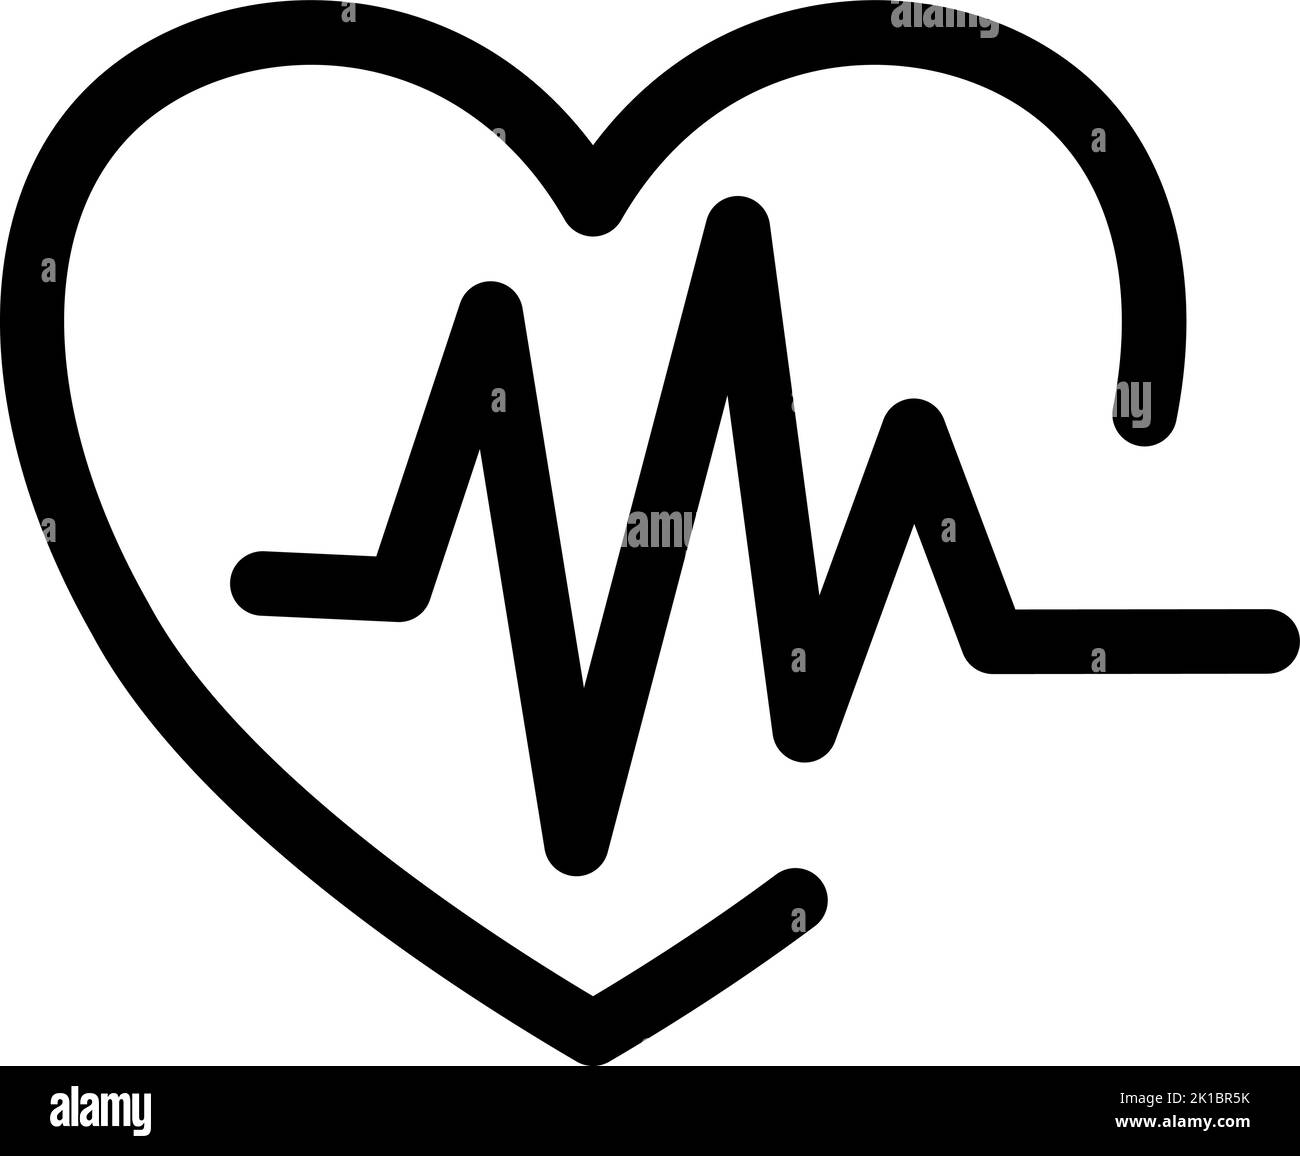 Heart beat cardiorgam vector logo icon. Heartbeat pulse flat sign for medical apps and websites. simple black line web symbol illustration Stock Vector